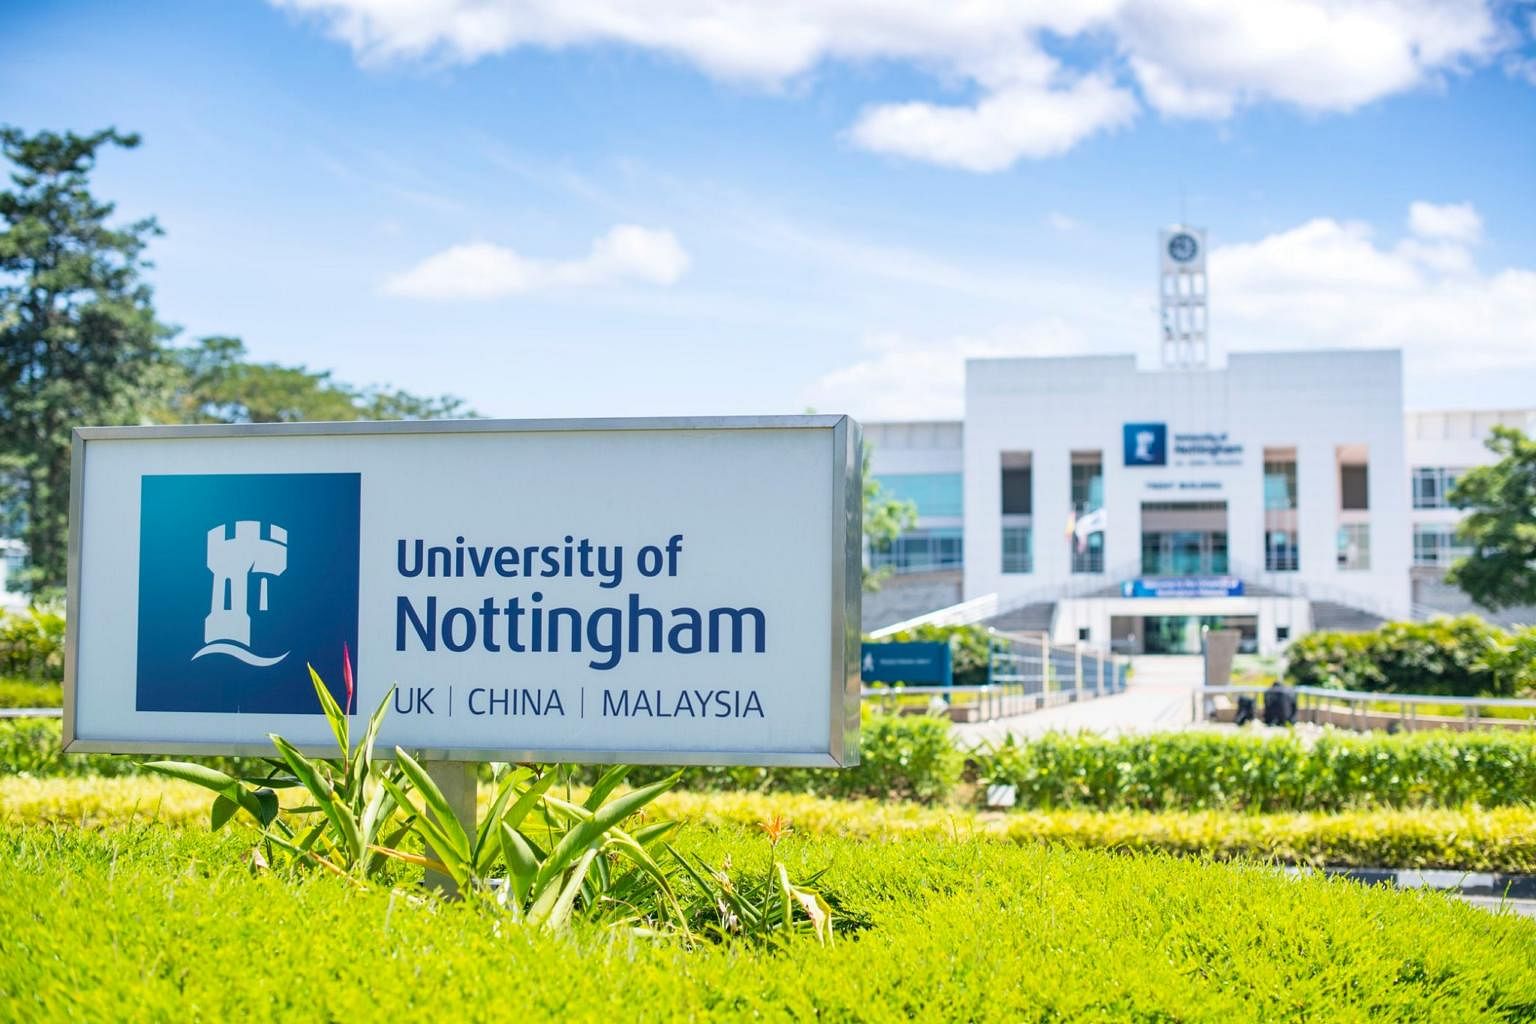 University Of Nottingham Malaysia Owners Weigh A Sale, Companies &Amp; Markets  News &Amp; Top Stories - The Straits Times